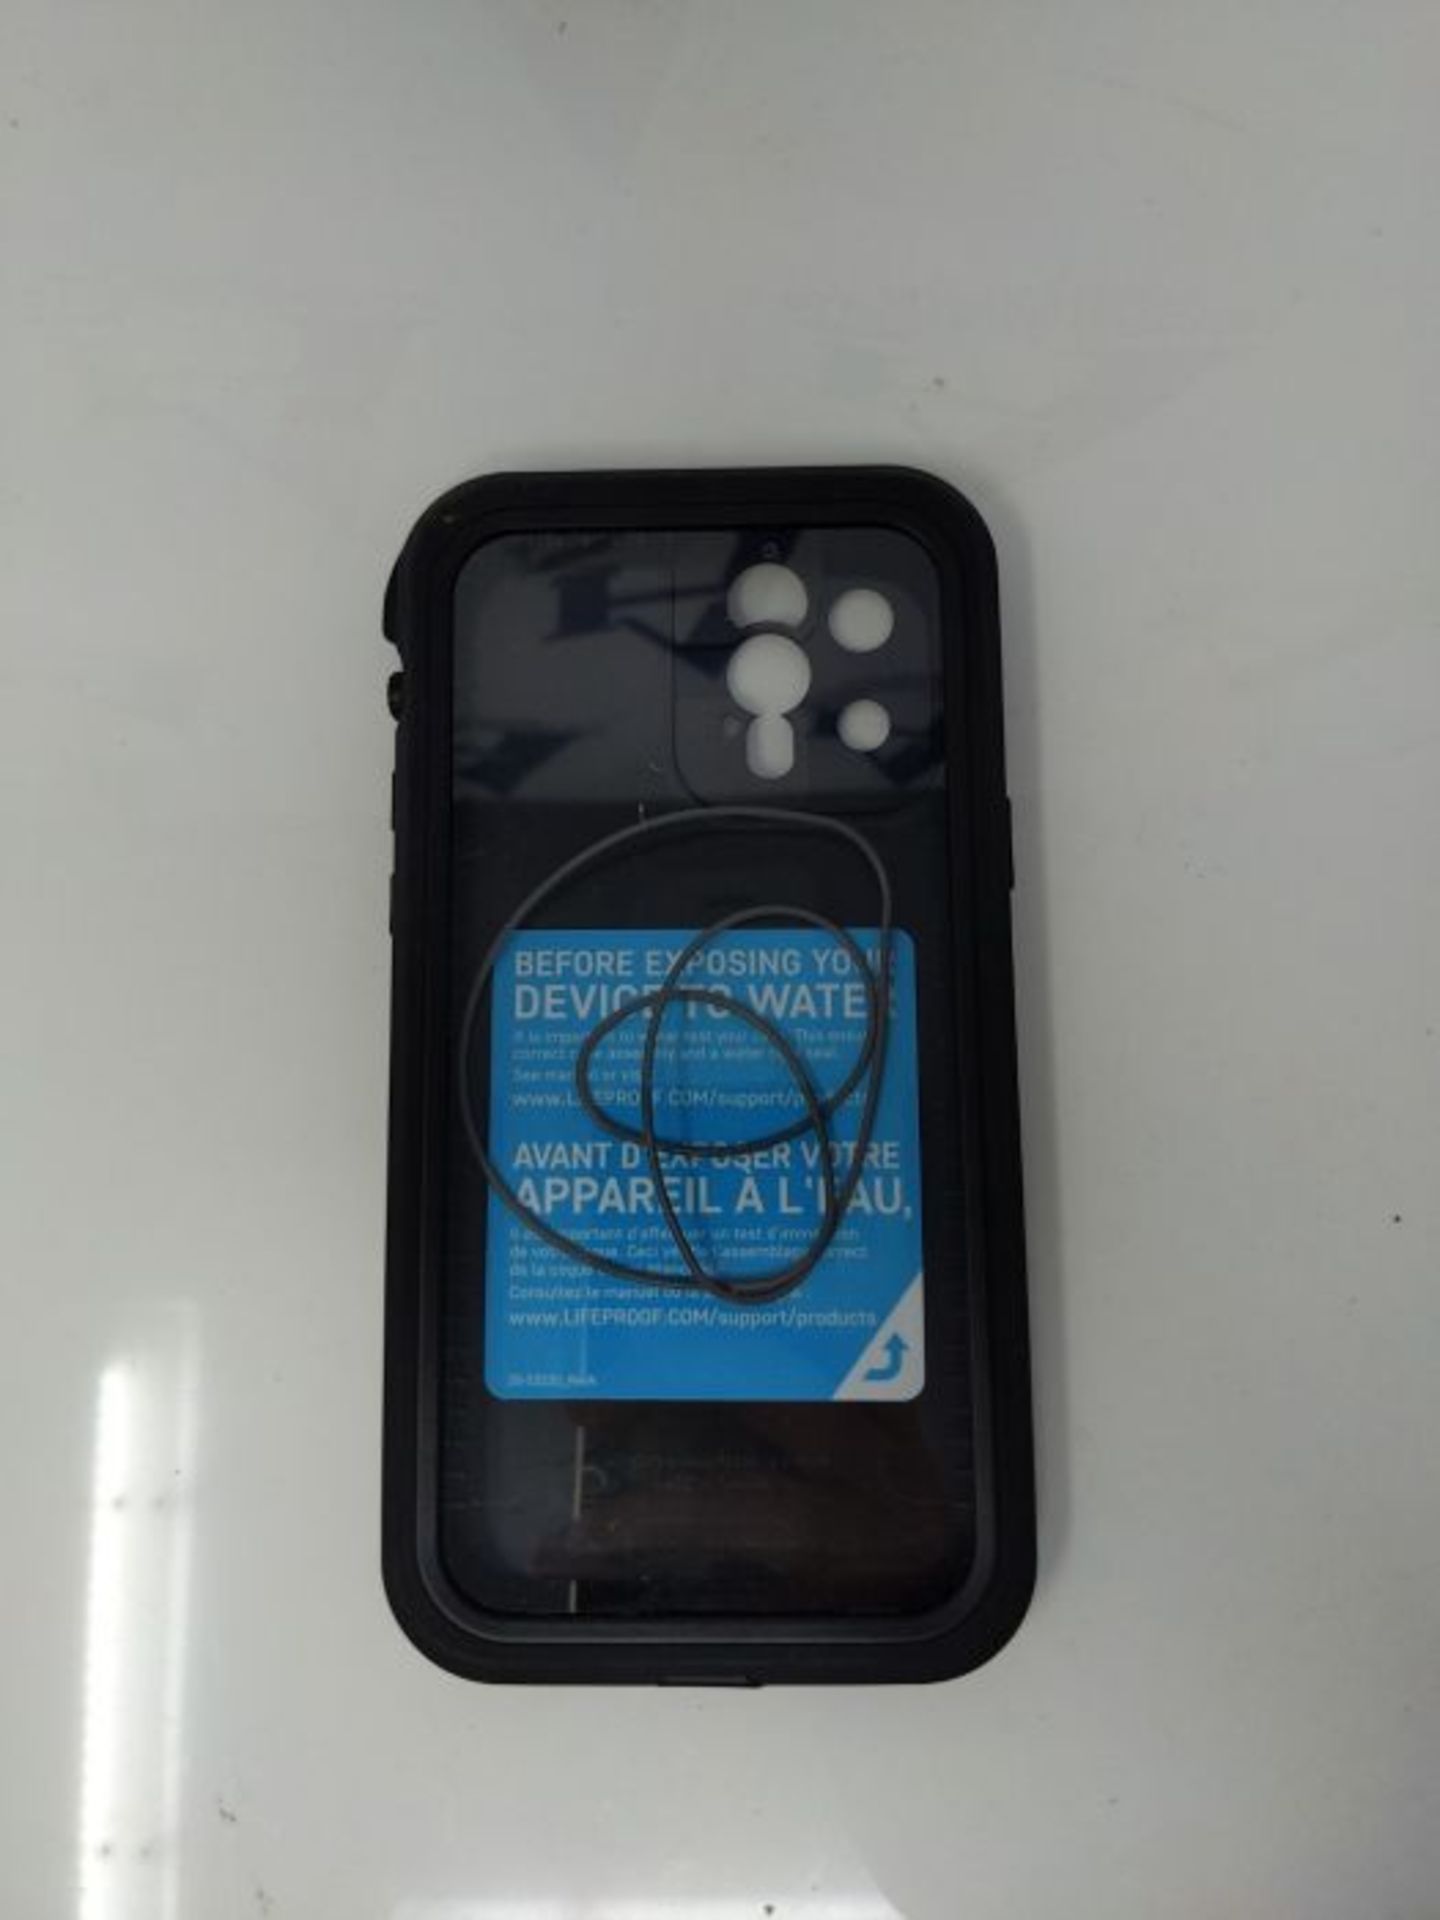 LifeProof for iPhone 12 Pro, Waterproof Drop Protective Case, Fre Series, Black - Image 3 of 3